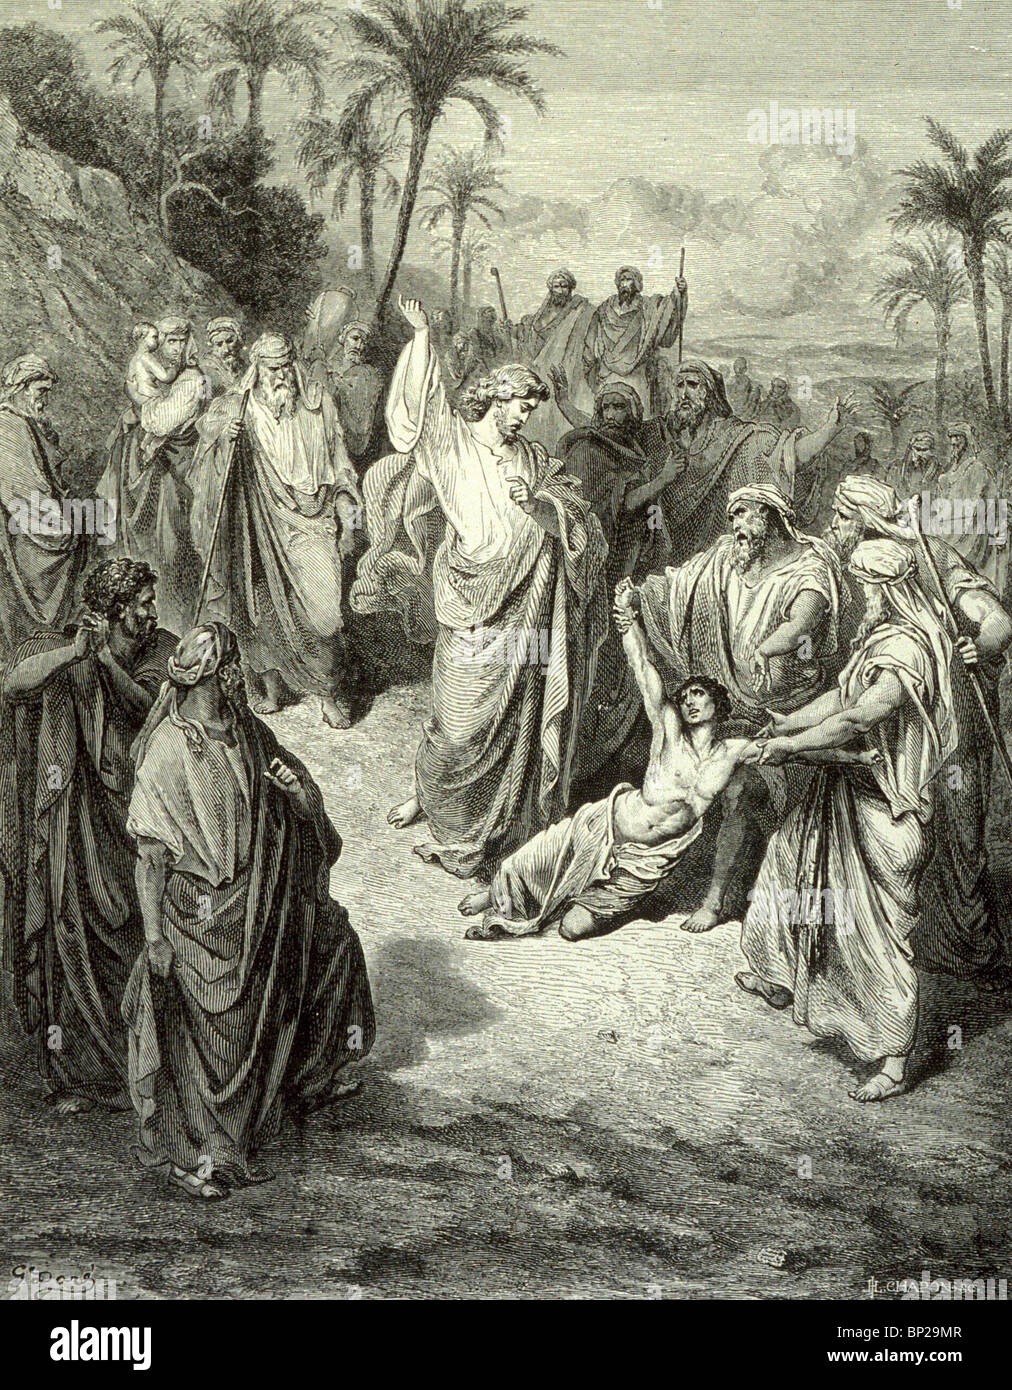 3180. JESUS HEALING THE LUNATIC (MATTHEW 17:15) ILLUSTRATION FROM THE DORE' BIBLE' PUBLISHED IN 1866, ENGLAND ' Stock Photo